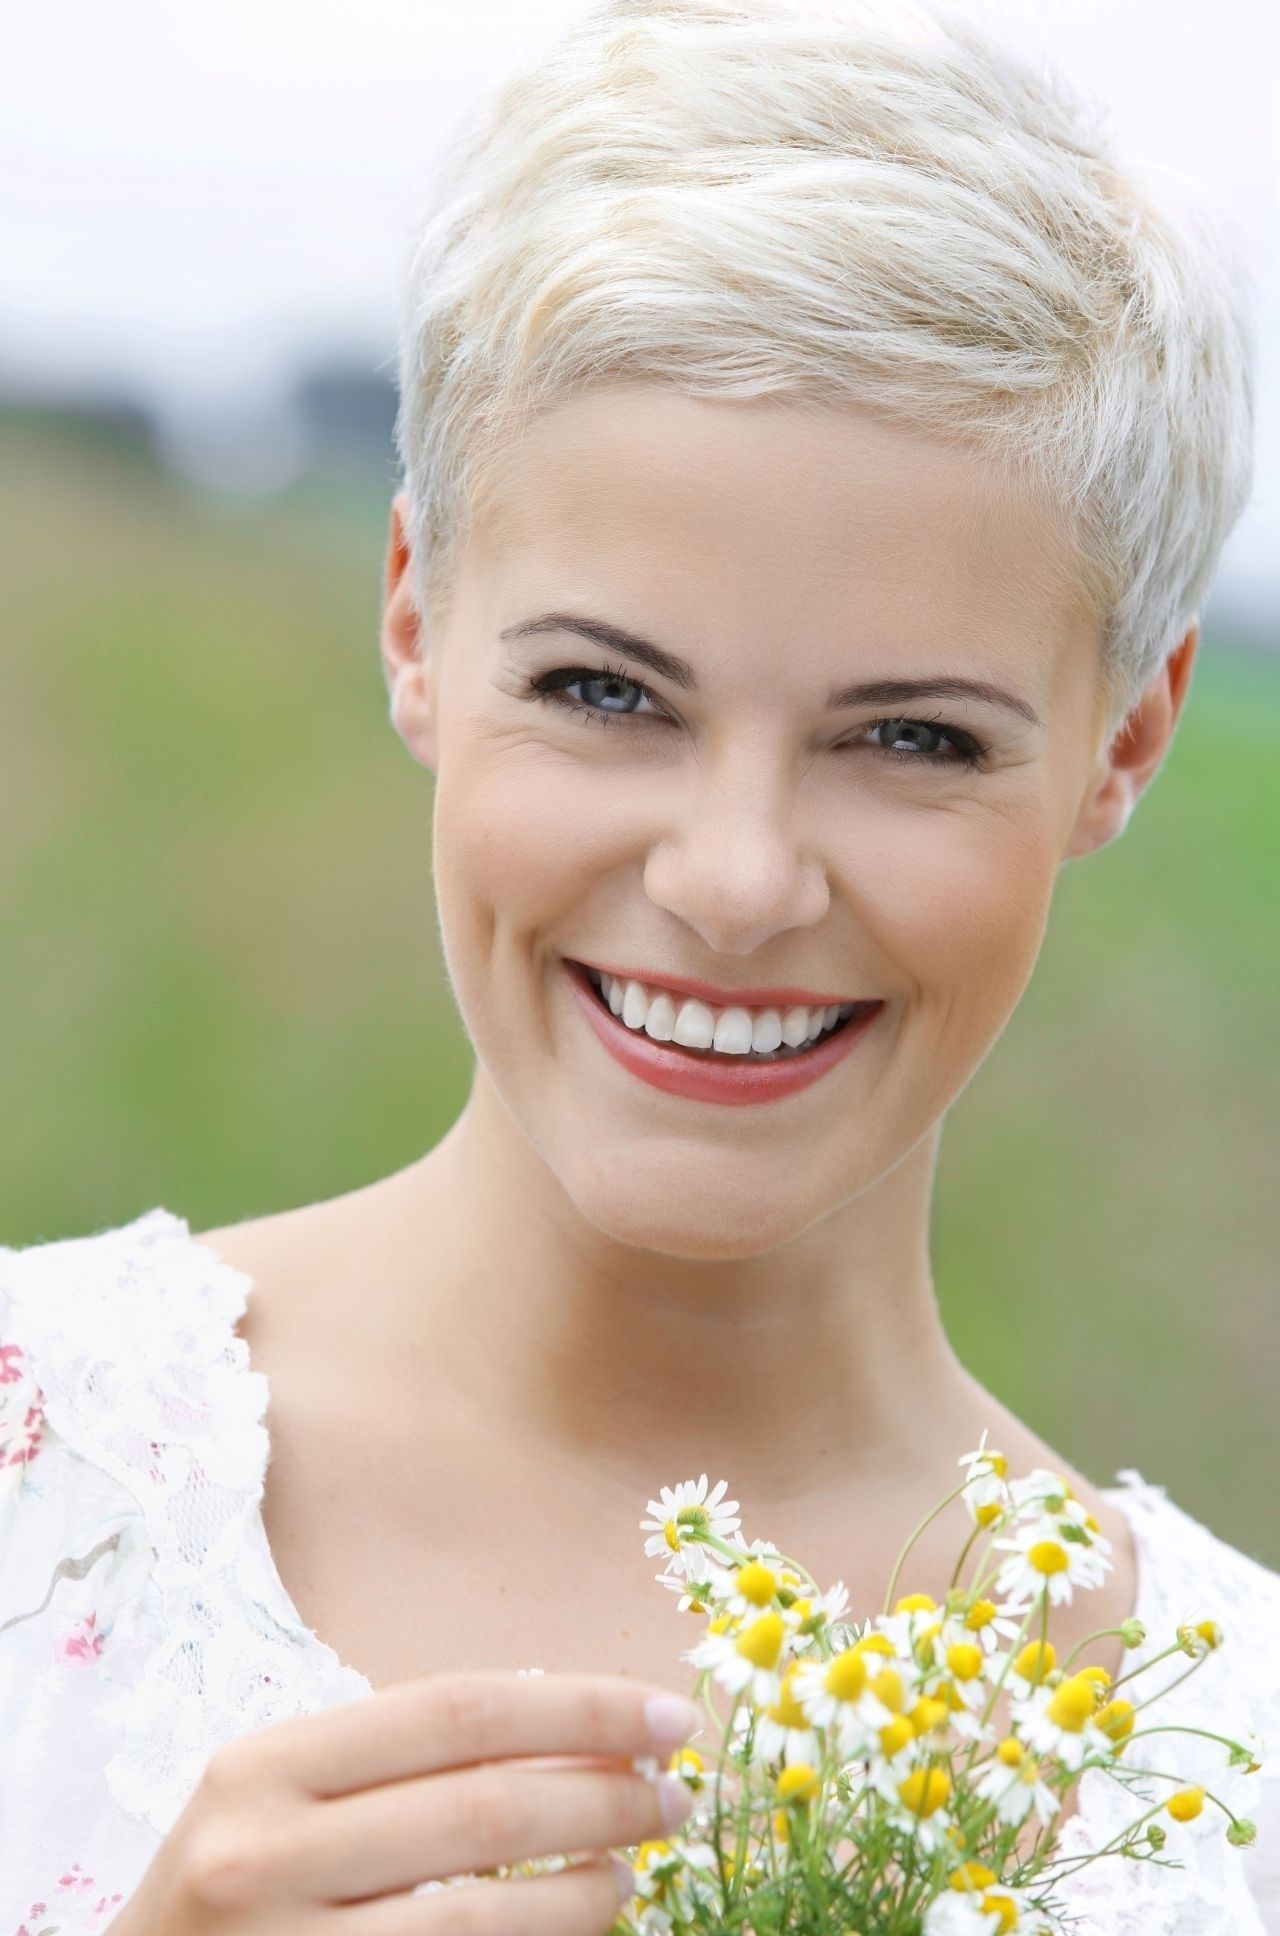 Short Pixie Haircut New Short Blonde Hairstyles Short Hairstyles Most Throughout Latest Short Blonde Pixie Hairstyles (Photo 6 of 15)